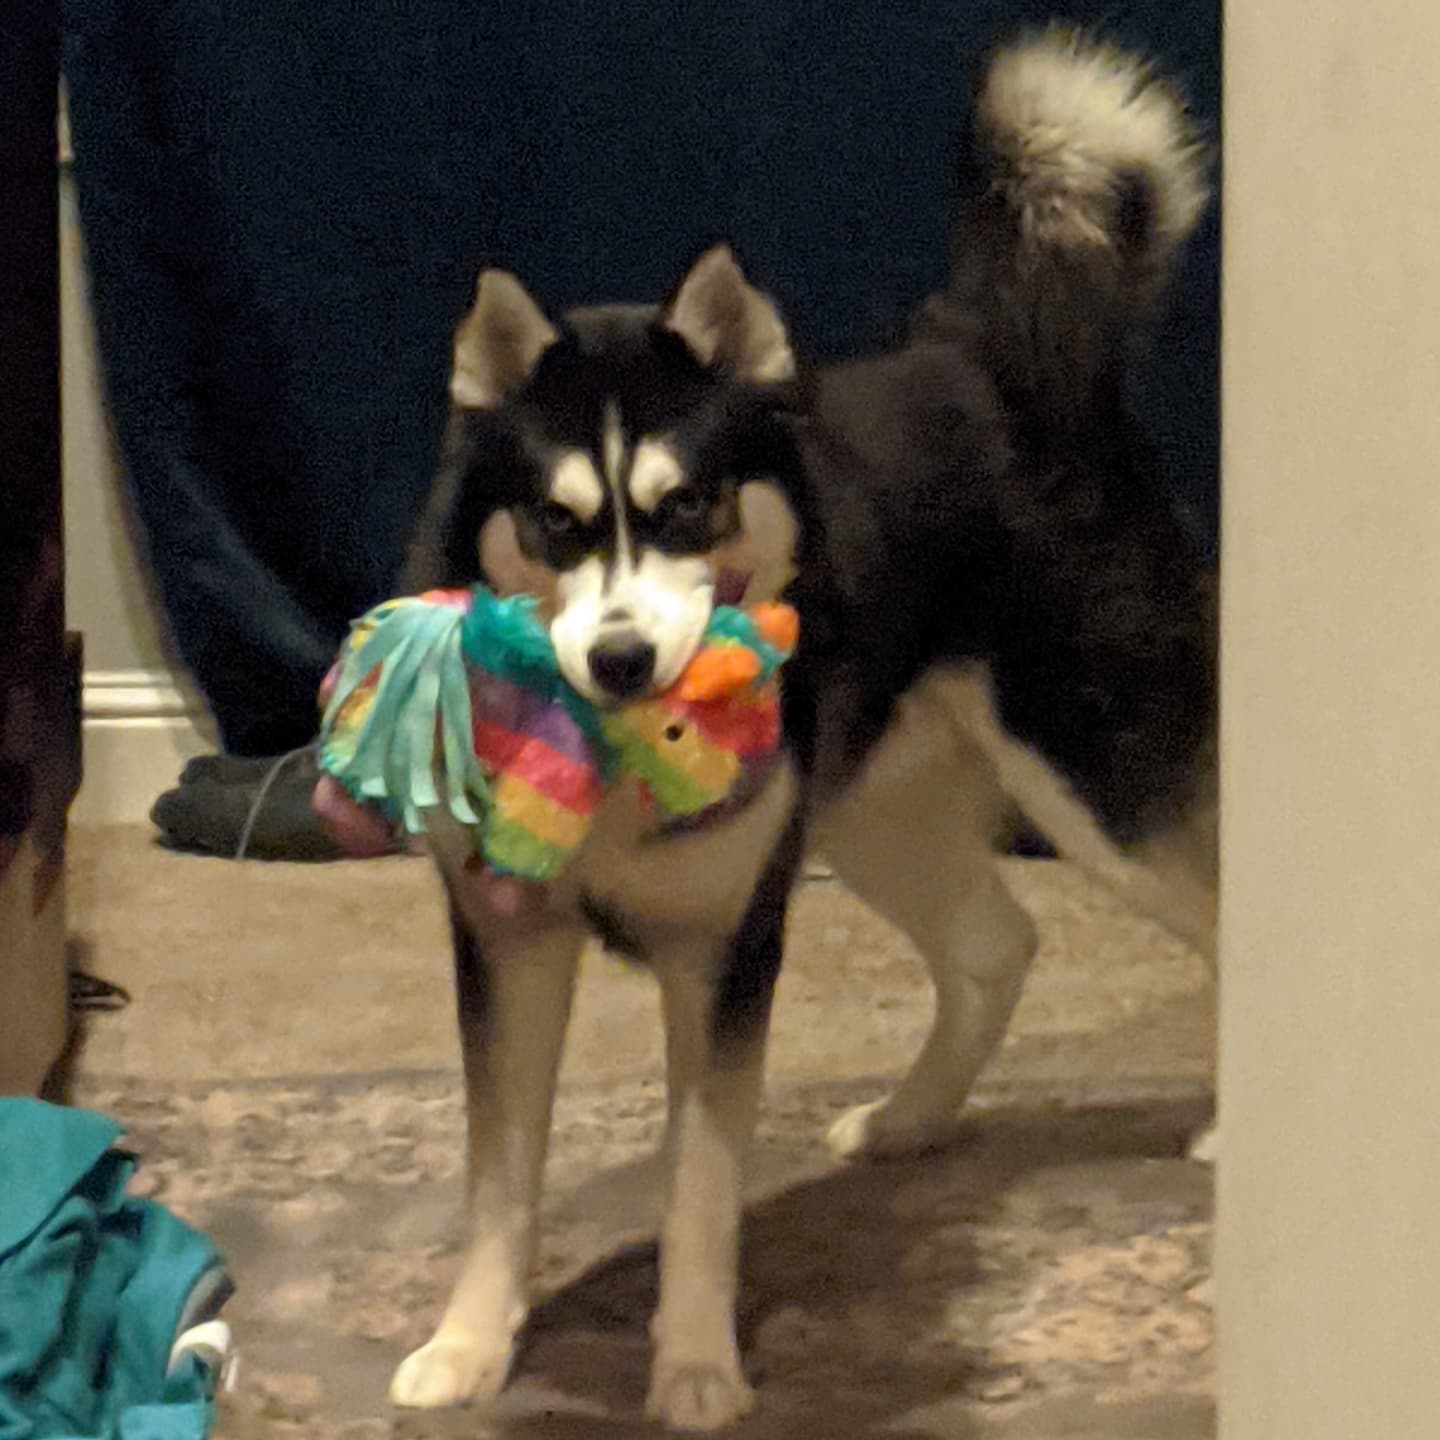 This is Nanuq's look of "How dare you move my toy from where I left it!" #stlnanuq #siberianhusky #huskiesofinstagram